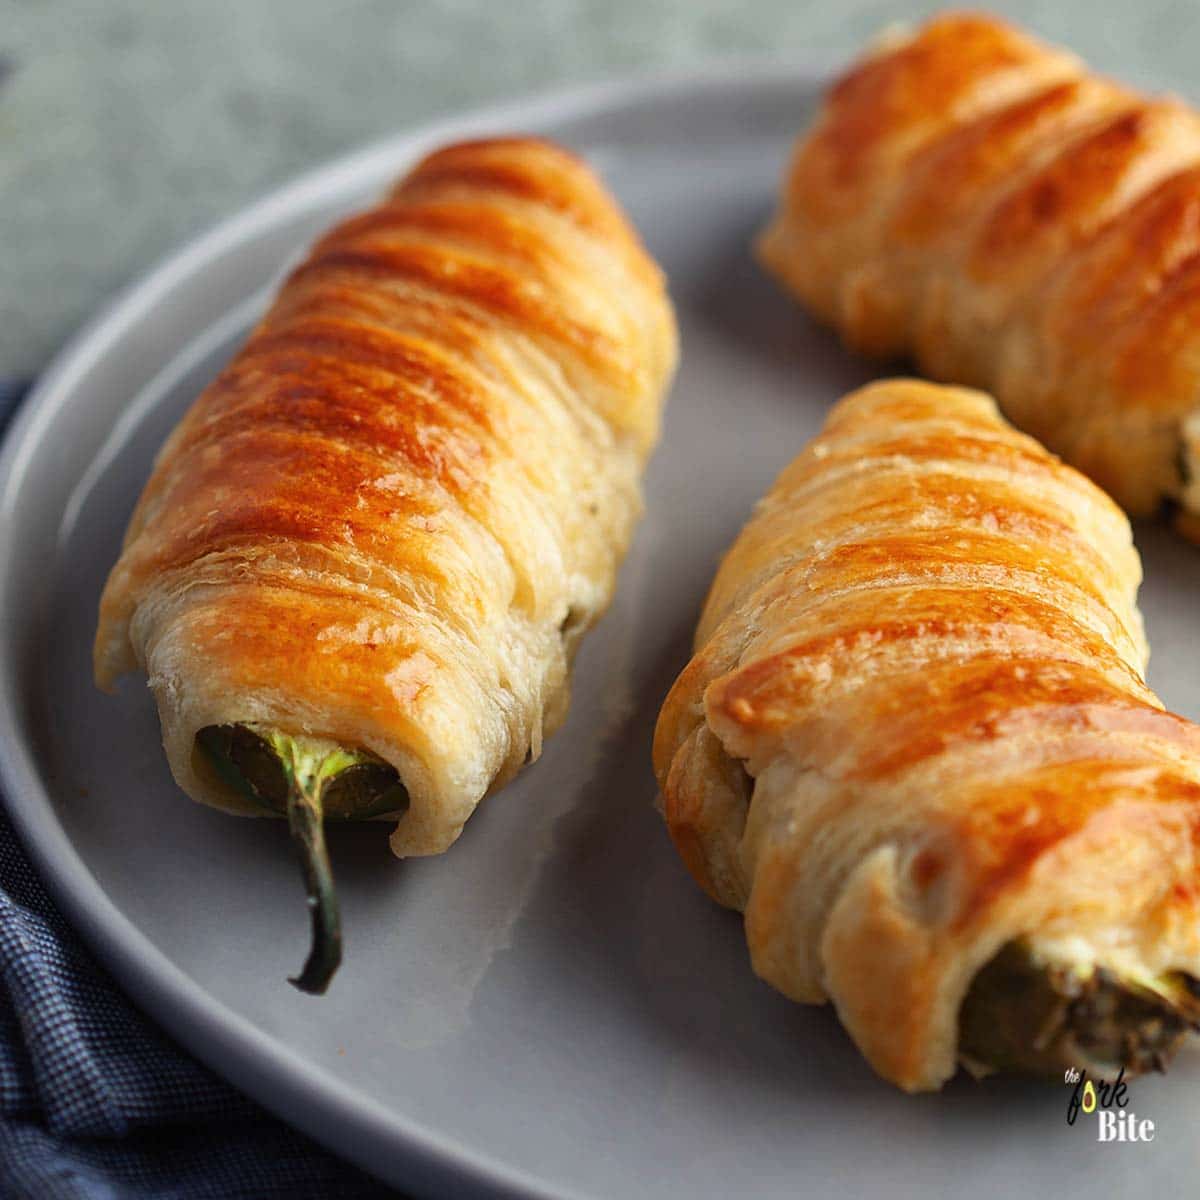 Jalapeno puffs are a quick way to enjoy spicy and savory jalapenos.